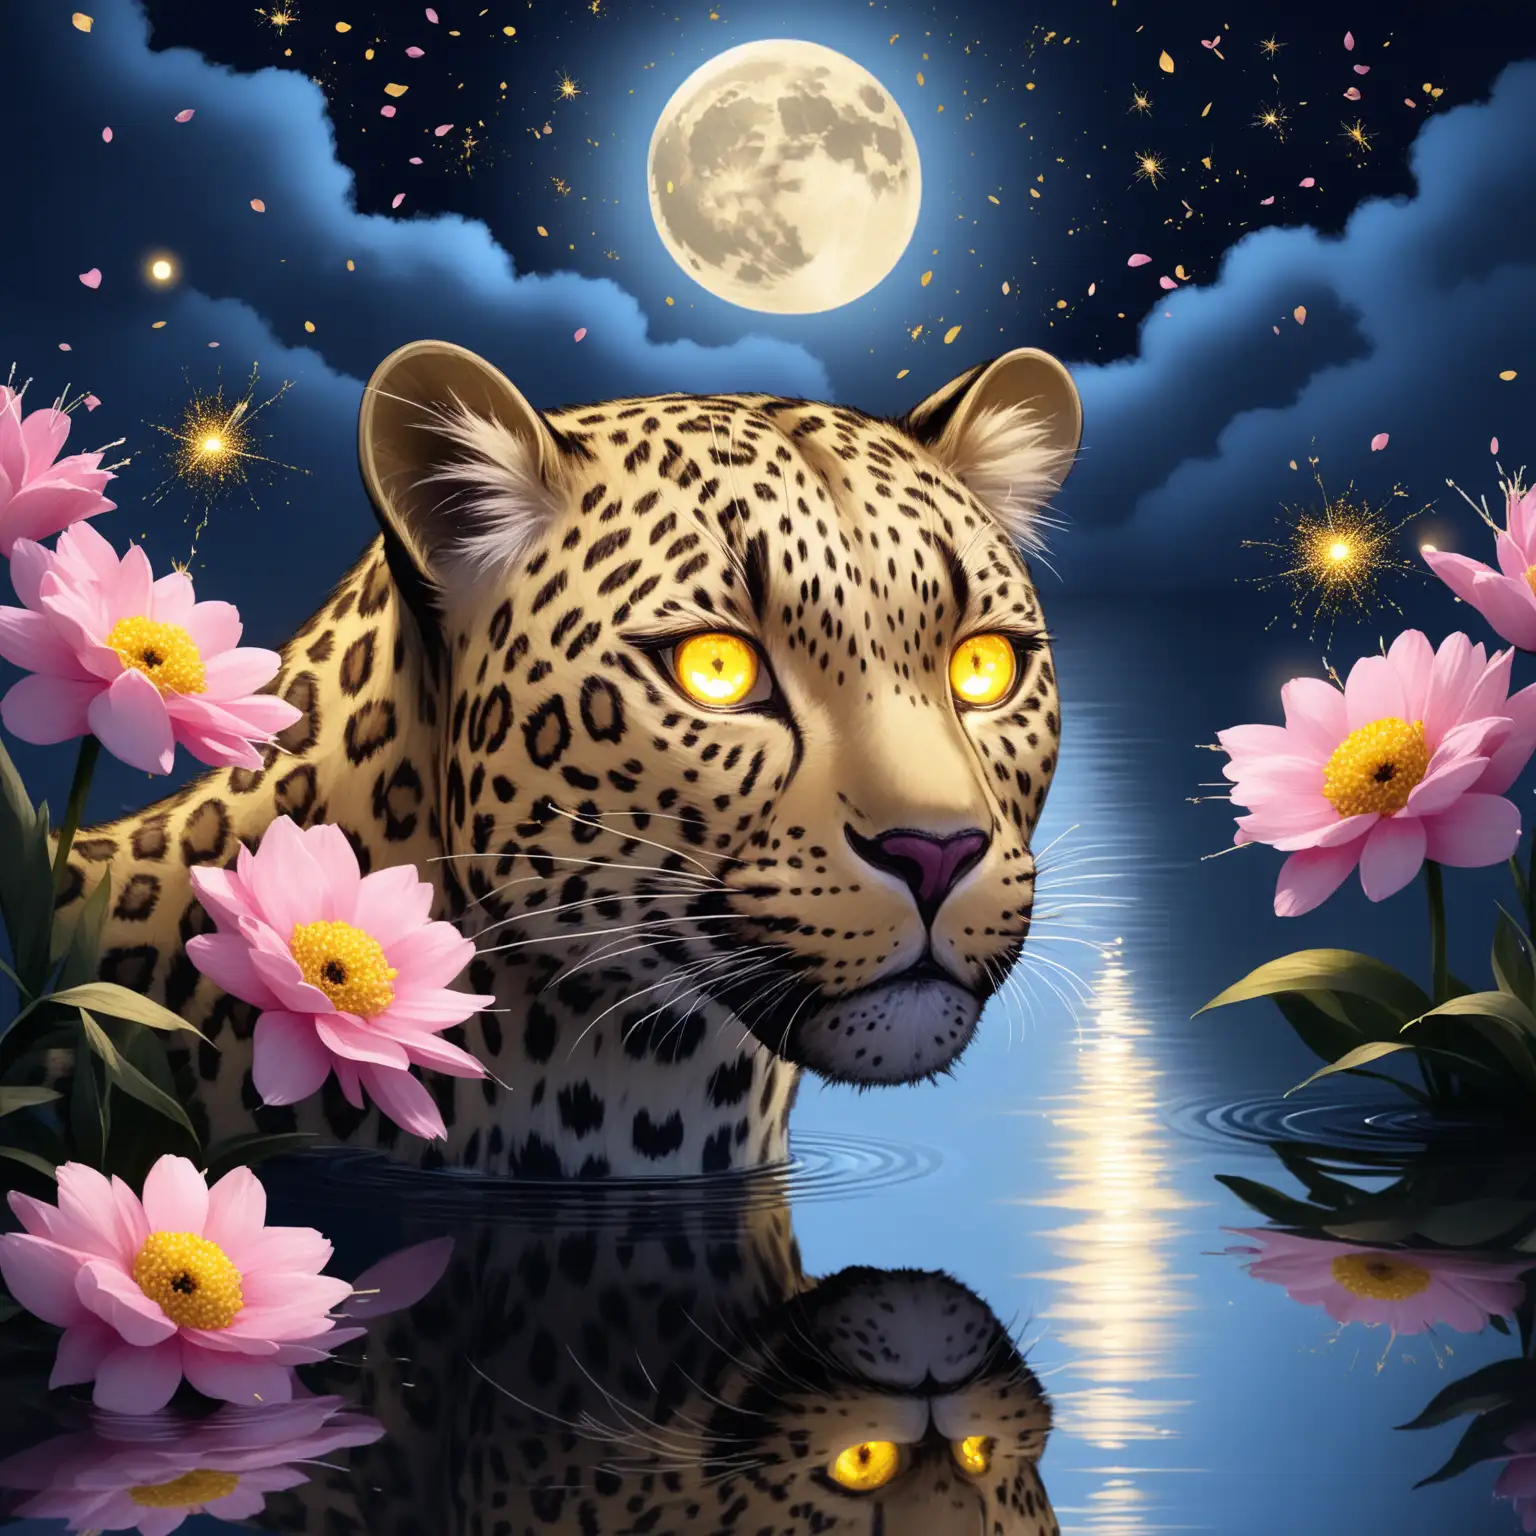 Majestic Leopard with Illuminated Eyes and Floral Reflections in Moonlit Waters